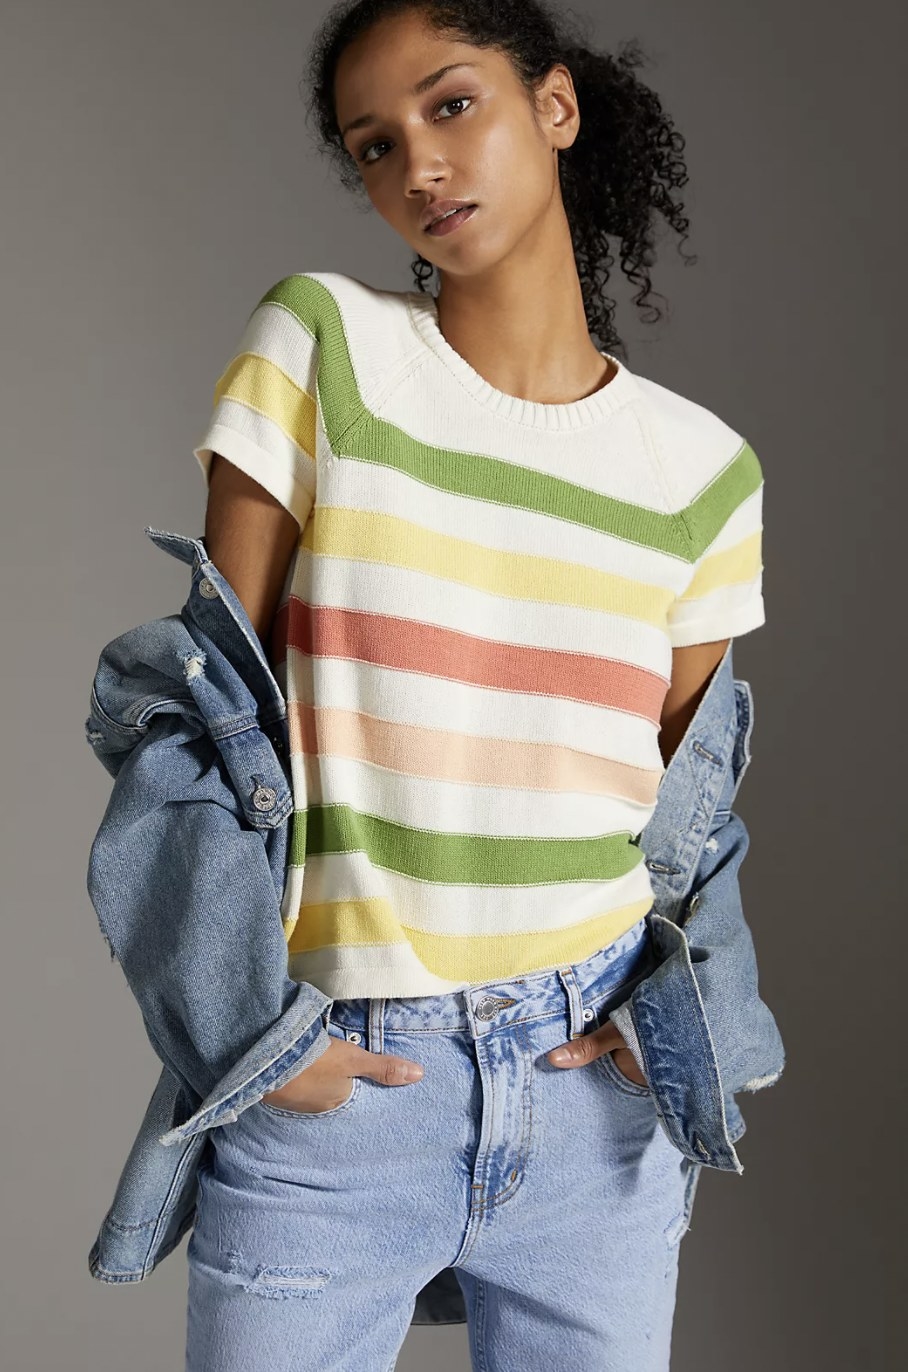 model wearing the sweater with green yellow and pink stripes